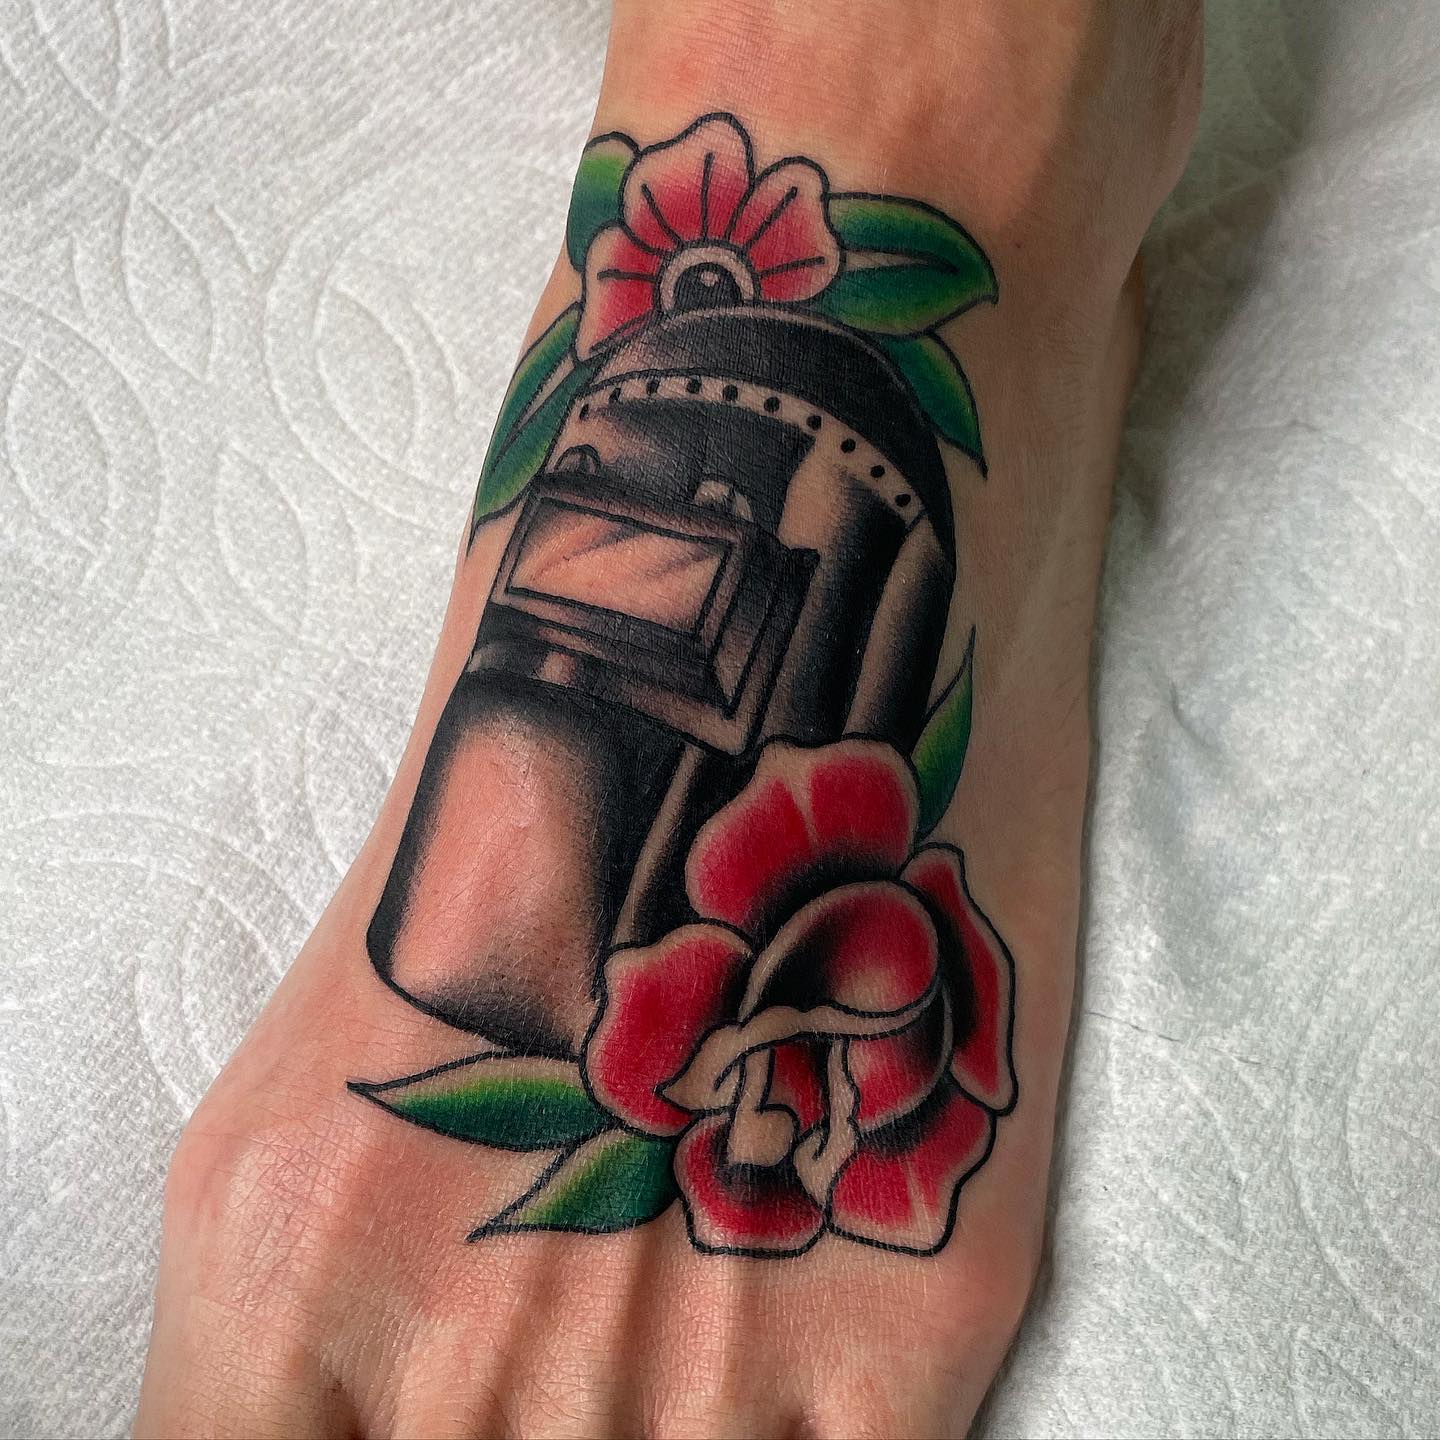 Red rose tattoo on feet by gitattoos jay